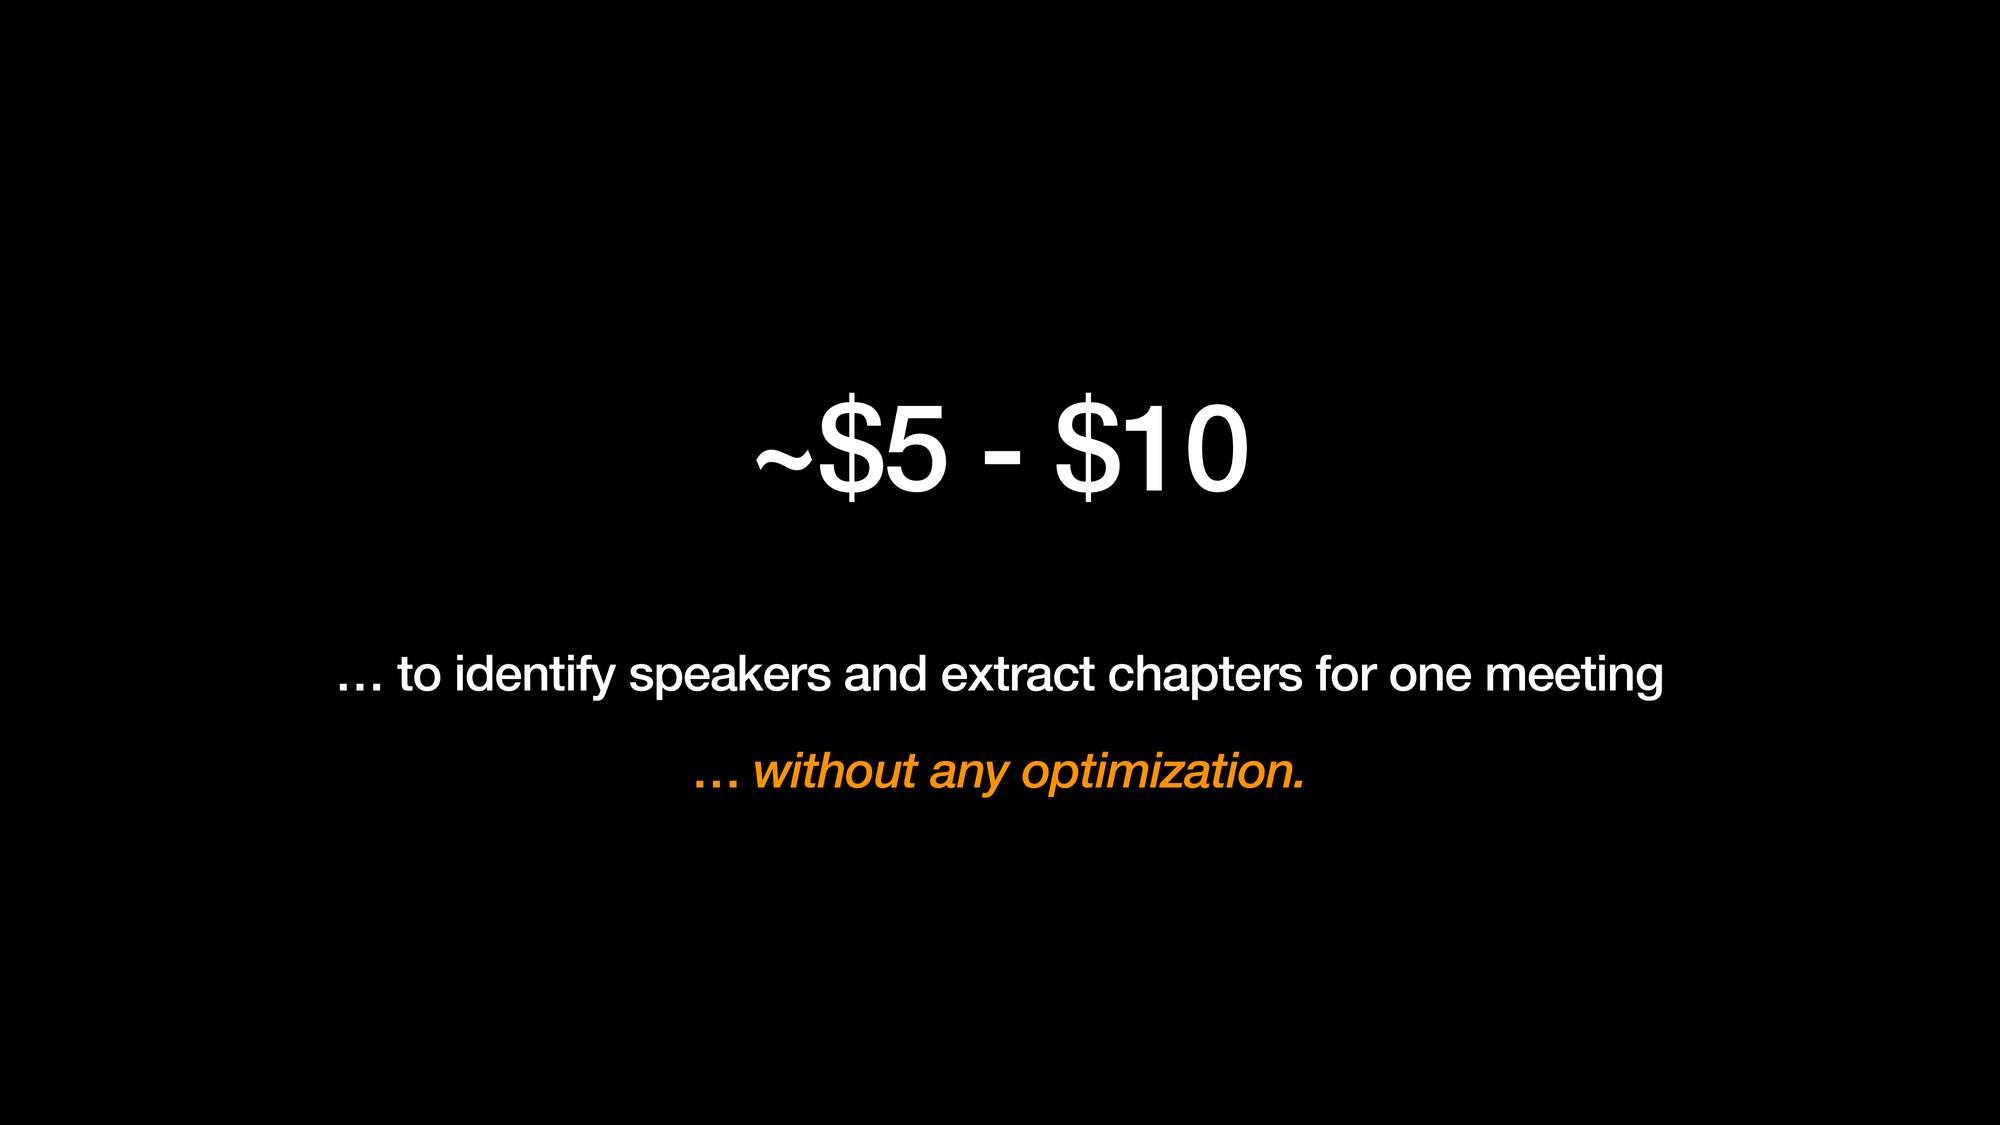 ~$5 - $10 to identify speakers and extract chapters for one meeting without any optimization.